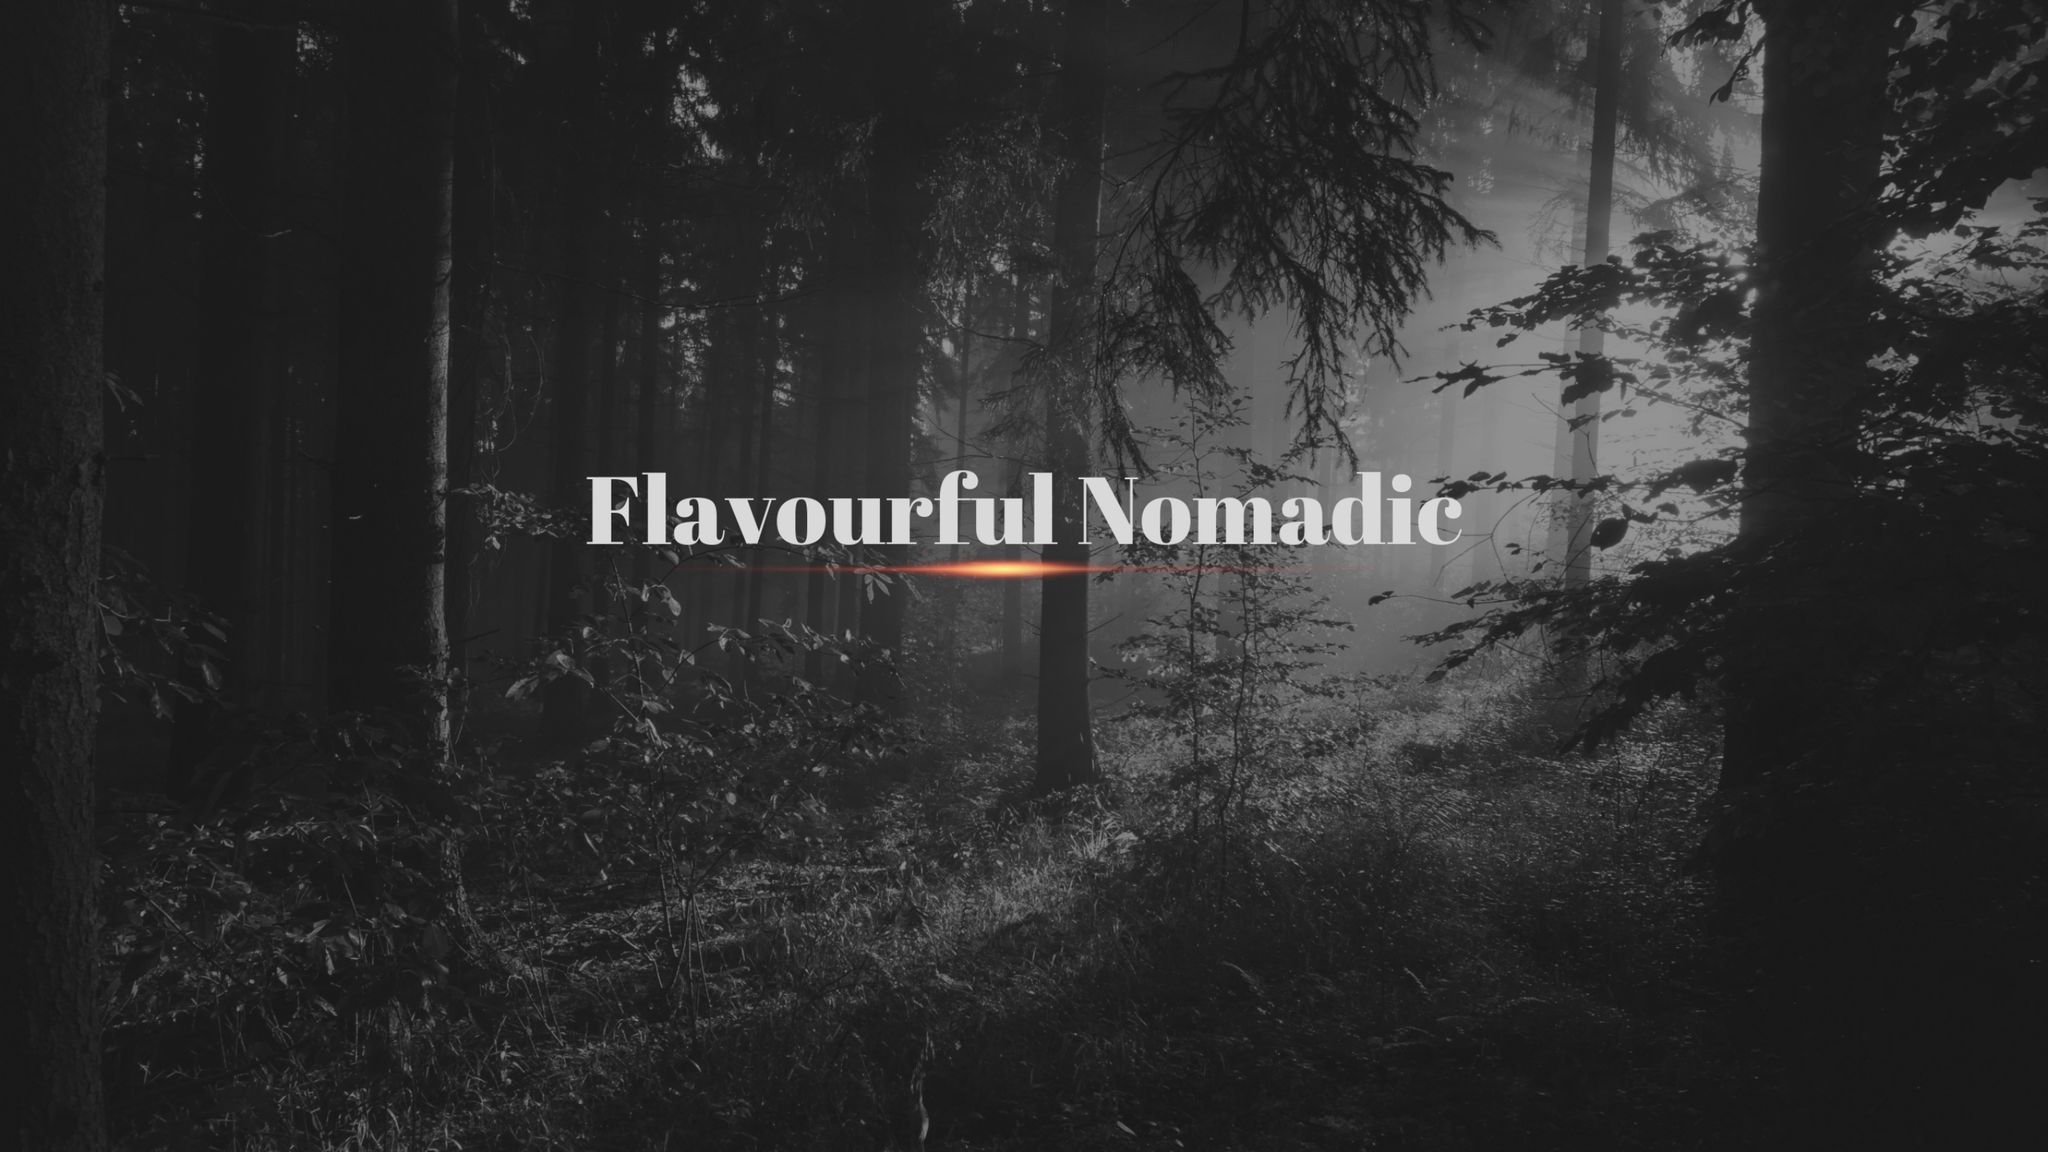 Cover Image of Flavourful Nomadic